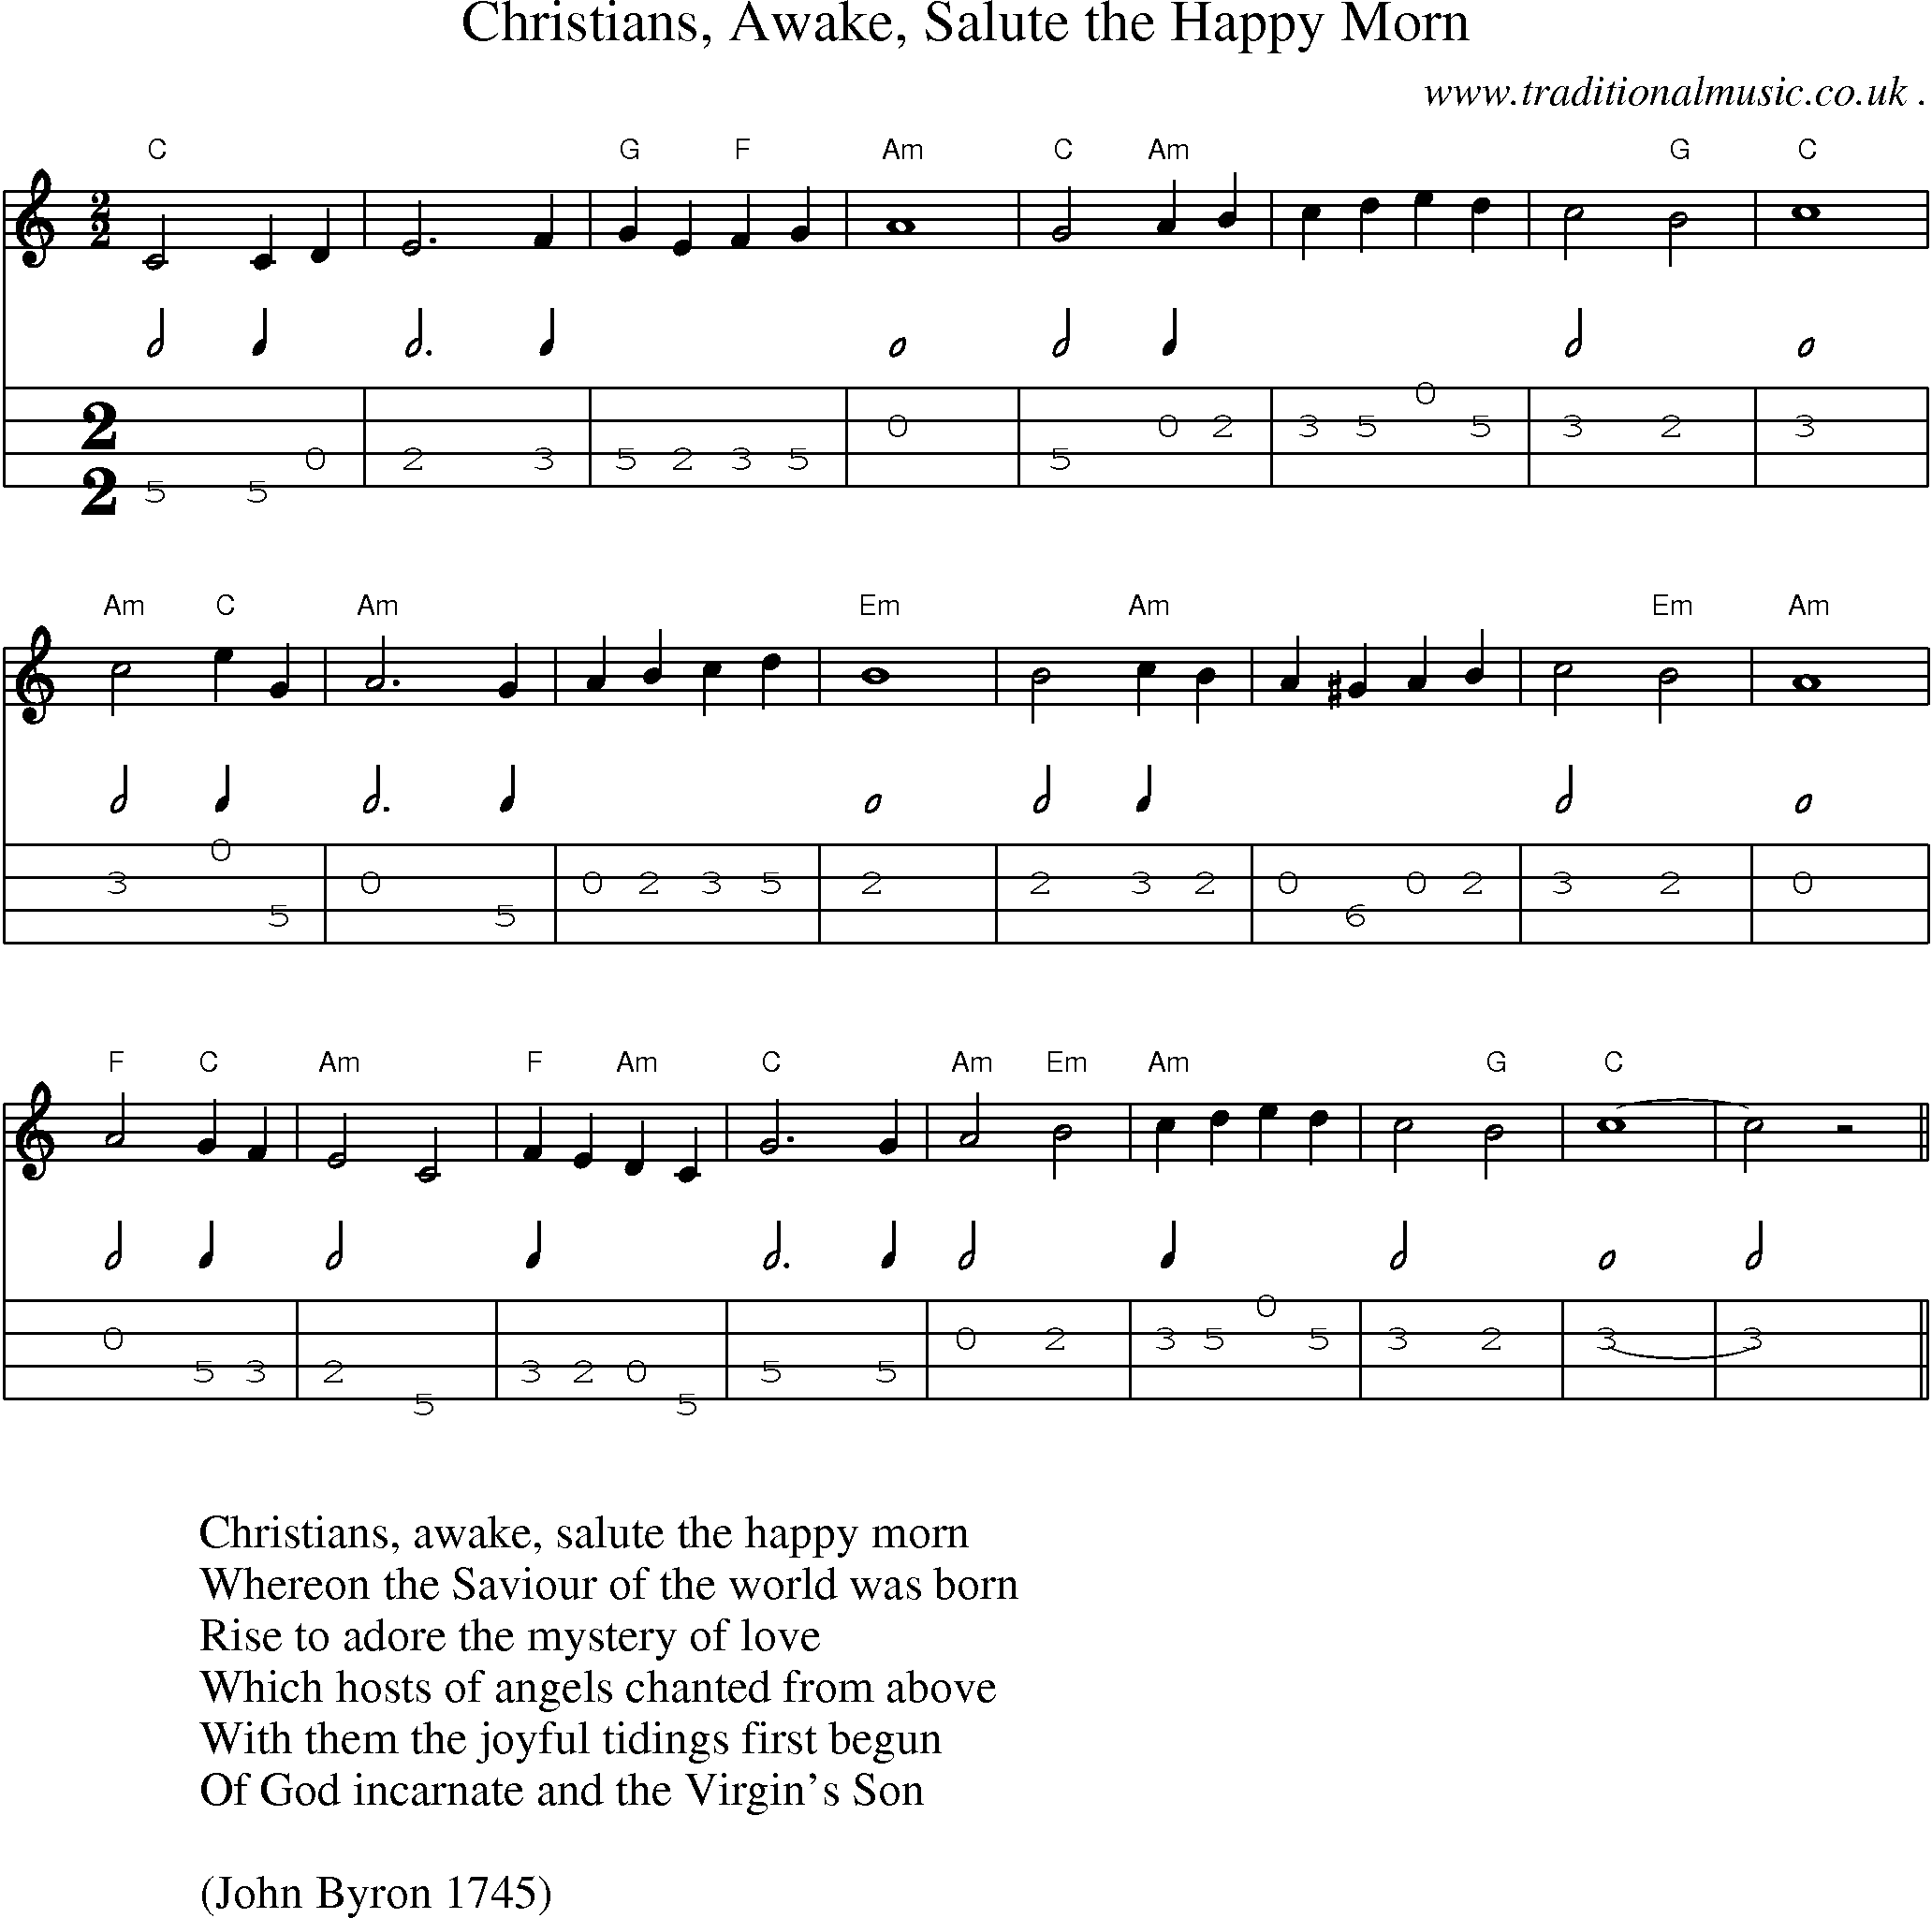 Music Score and Guitar Tabs for Christians Awake Salute the Happy Morn